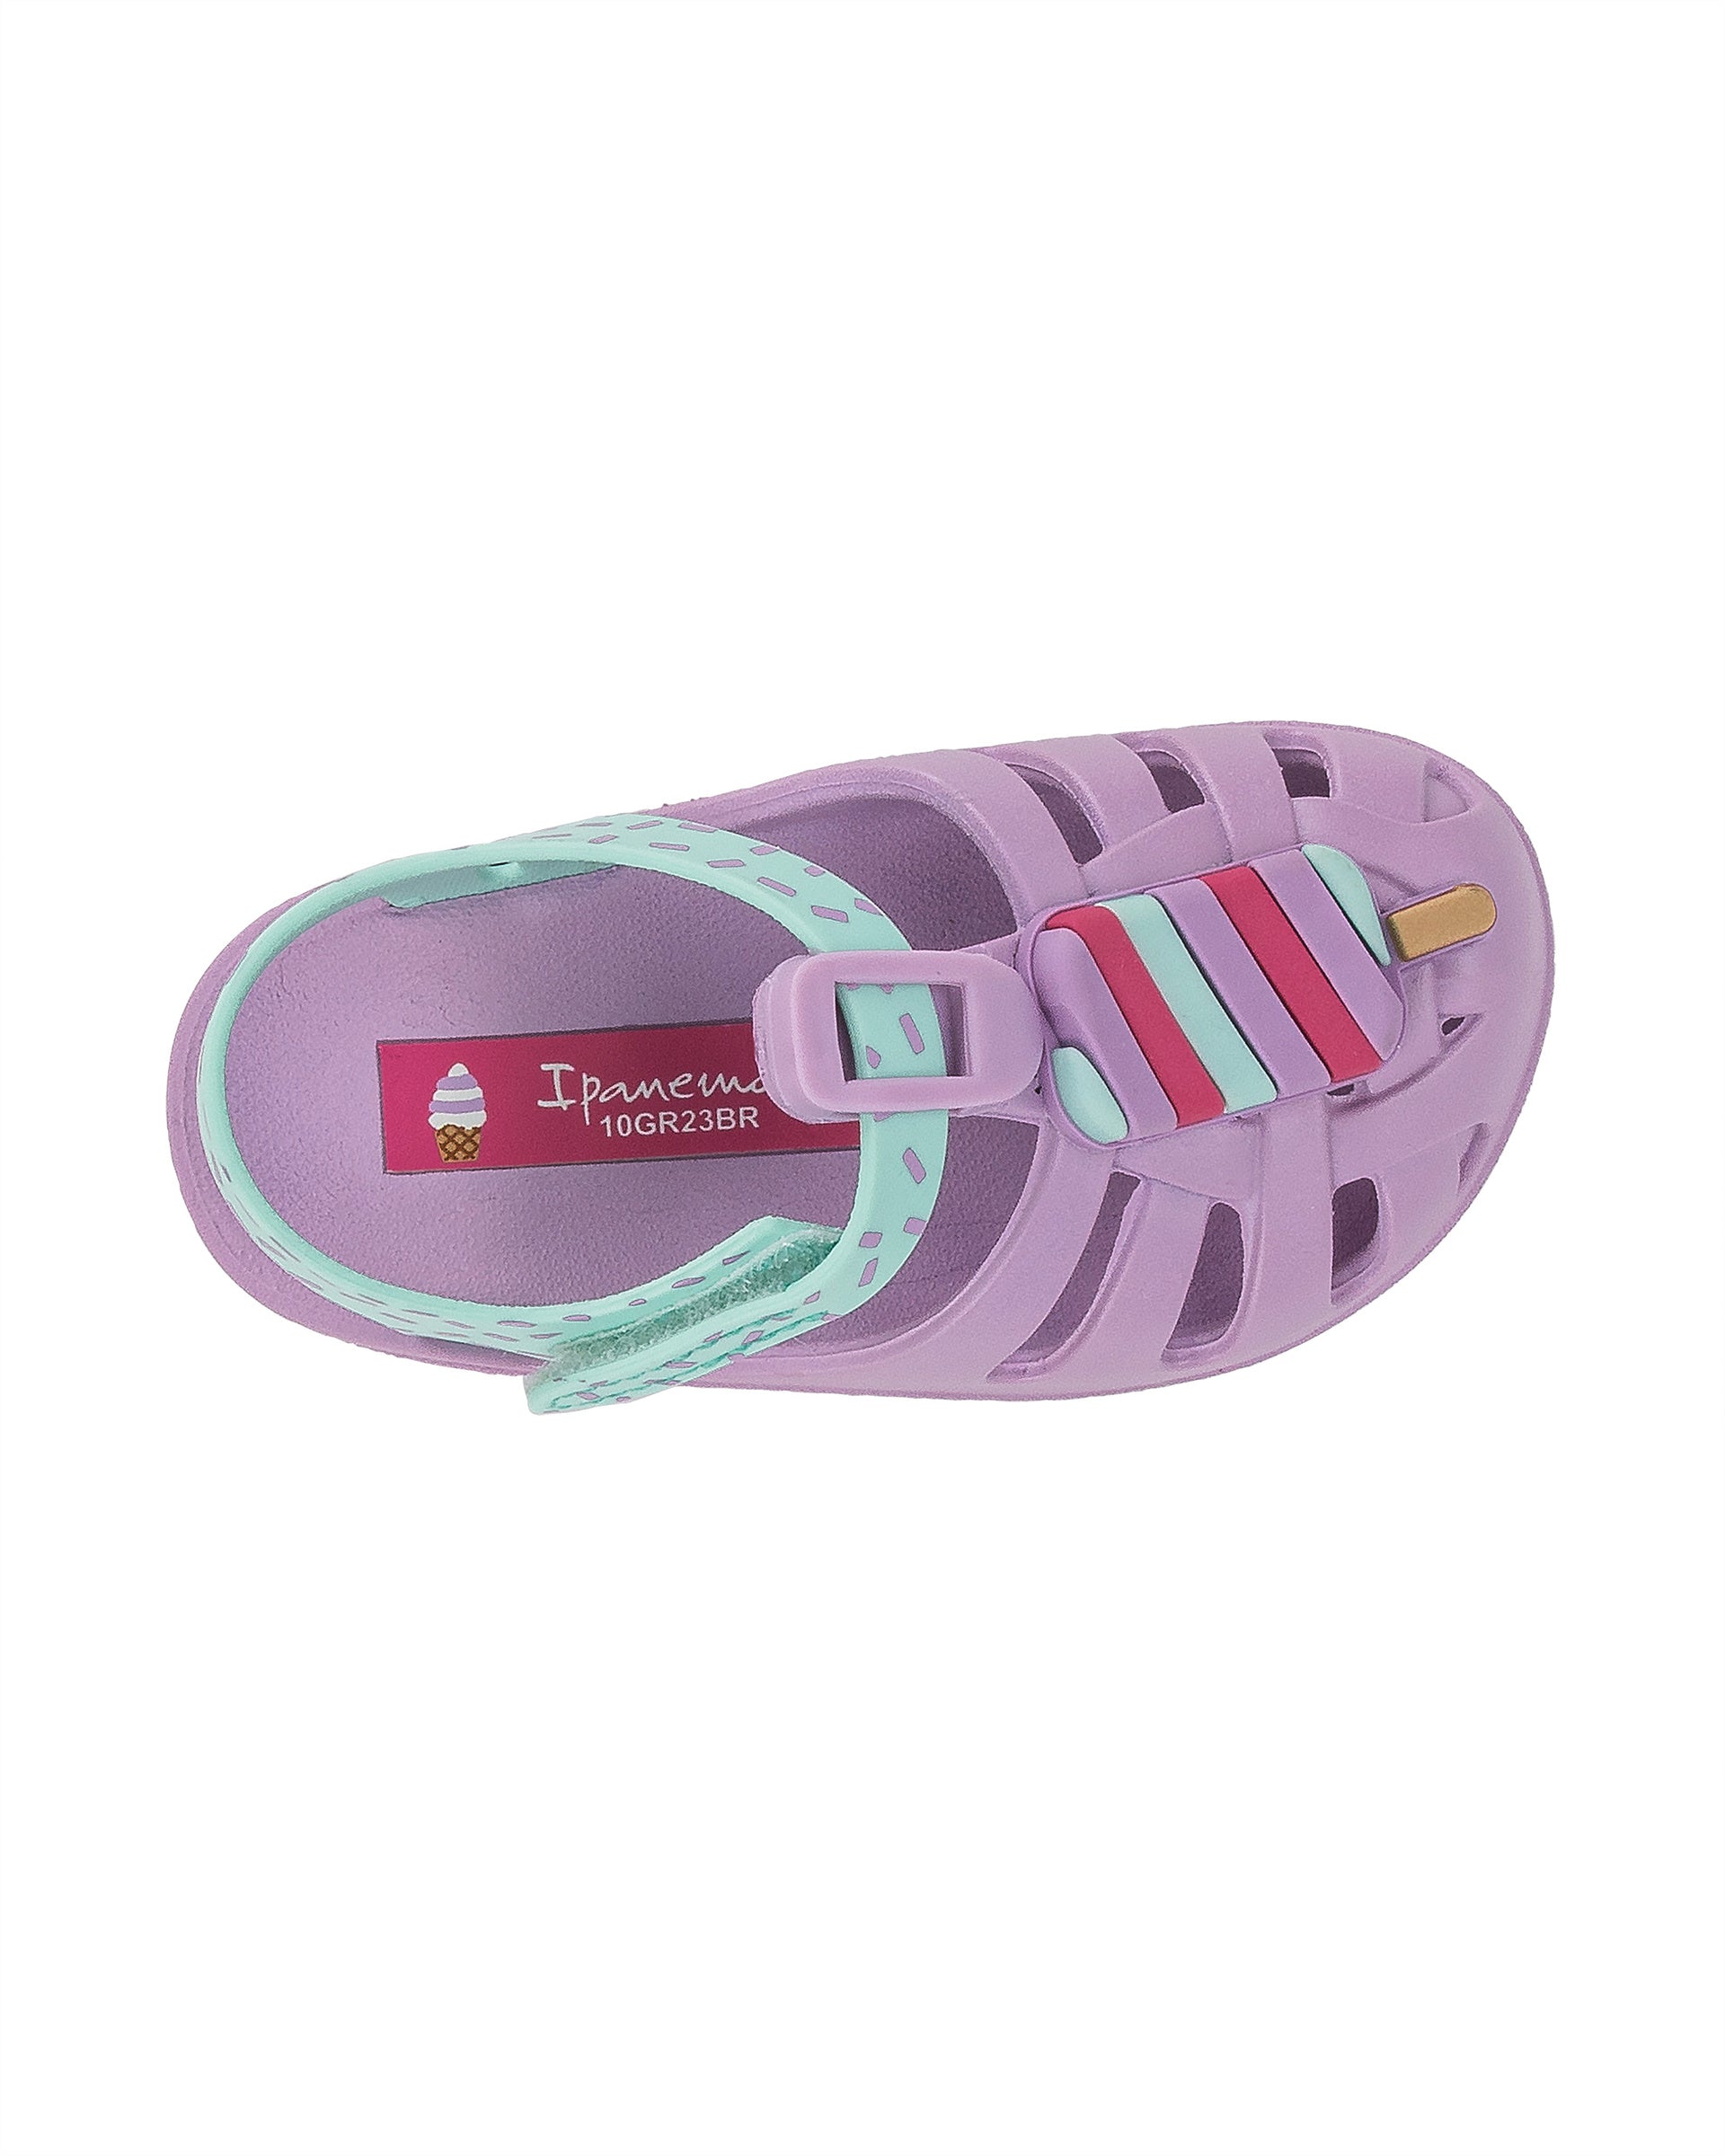 Top view of a purple and green Ipanema Summer baby fisherman sandal with popsicle on the upper.